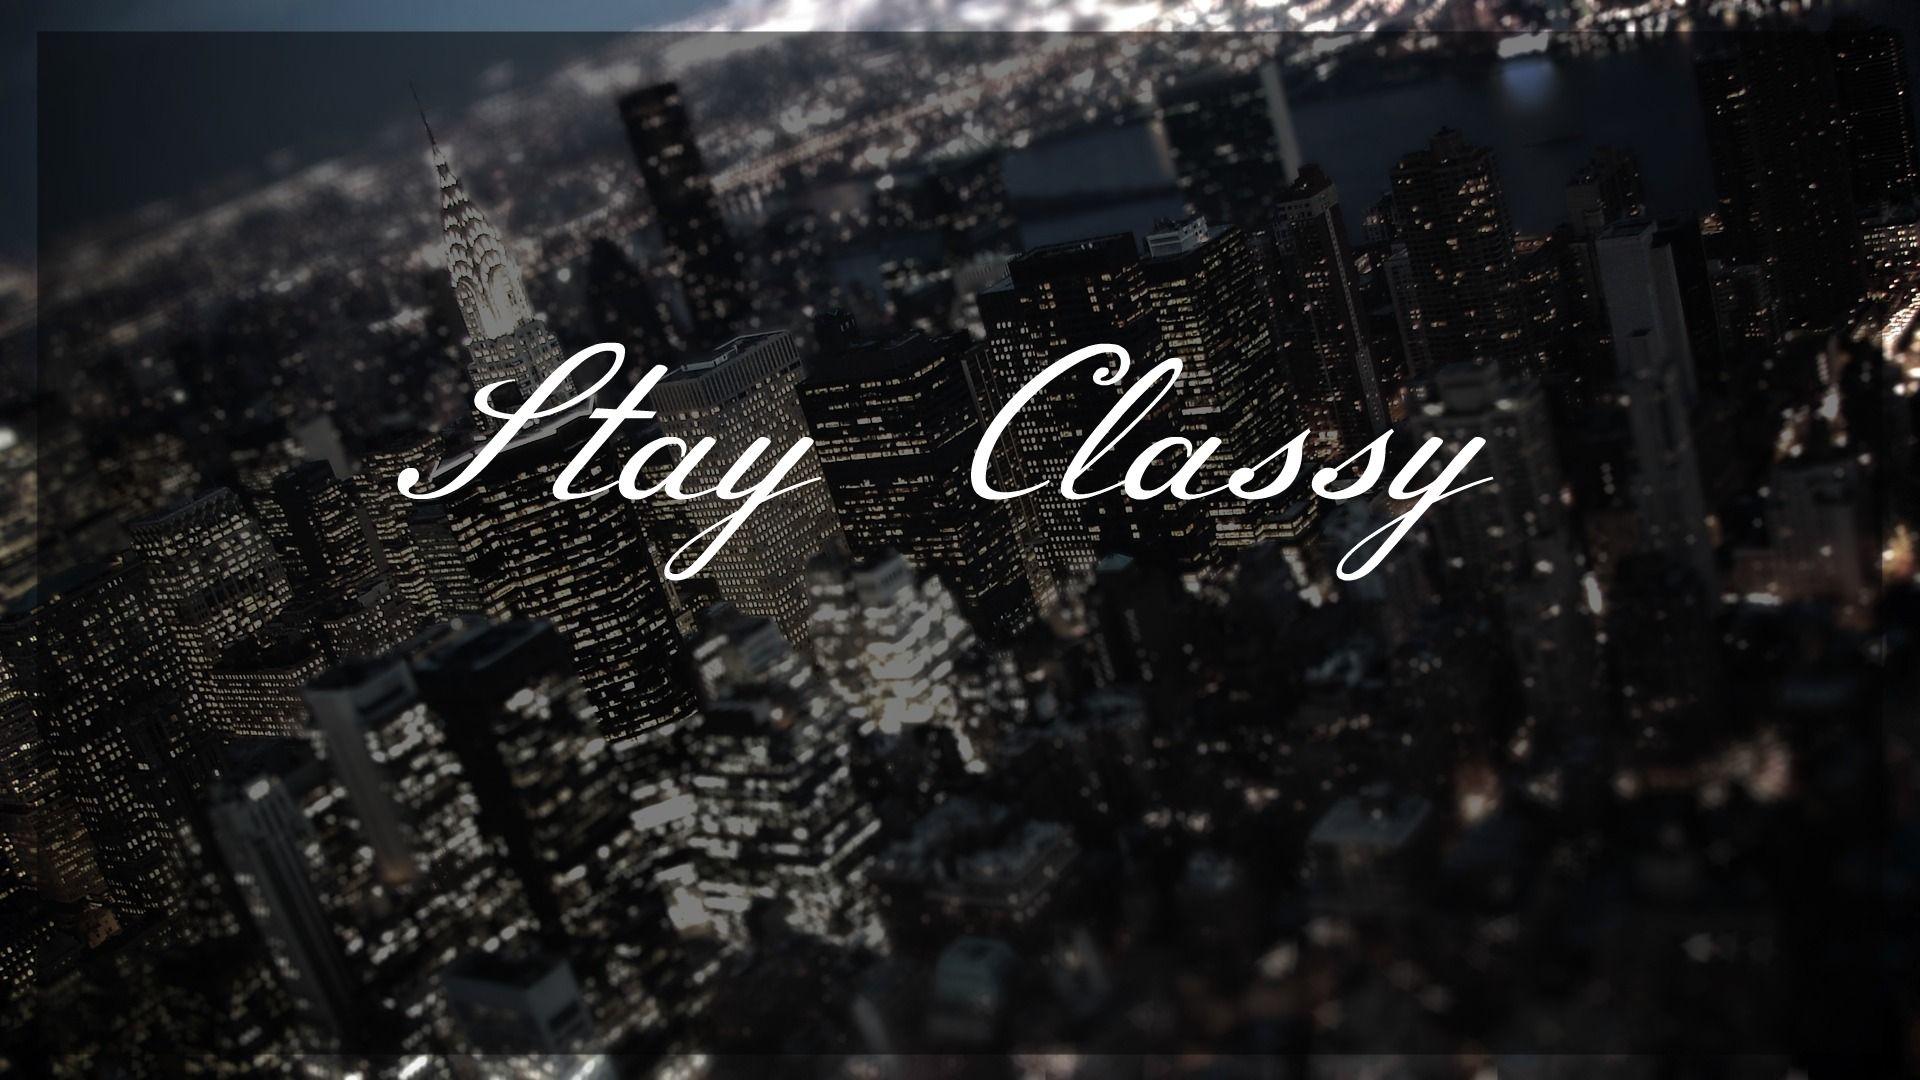 Download Free HD Classy Background